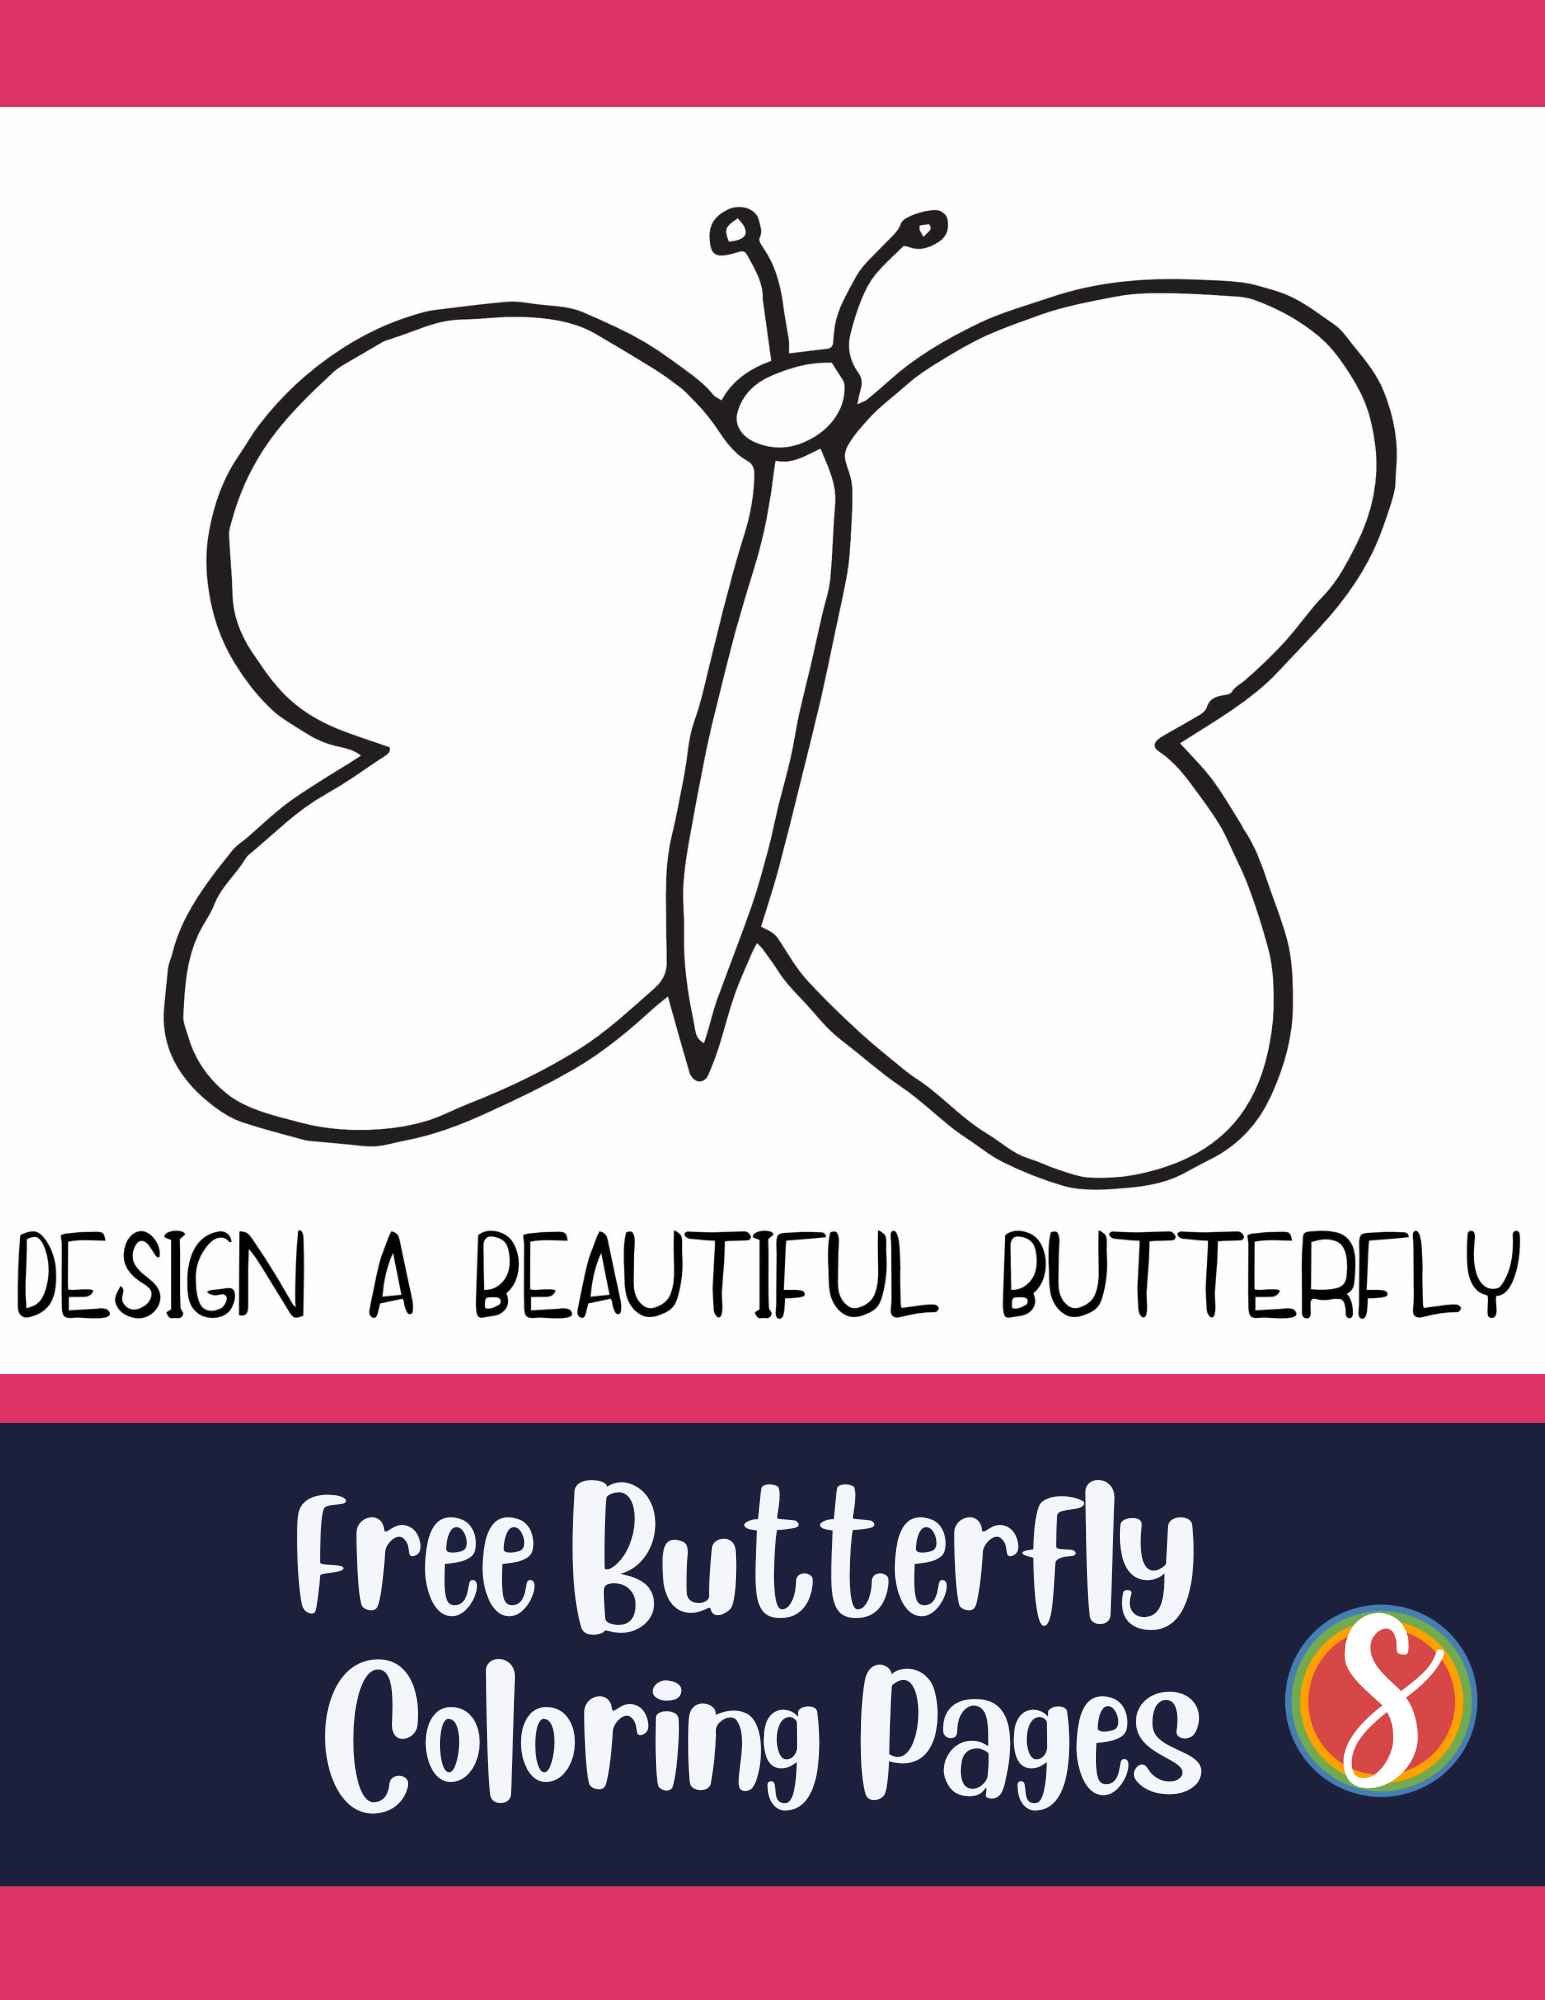 Simple butterfly drawing to fill in and color to make your own